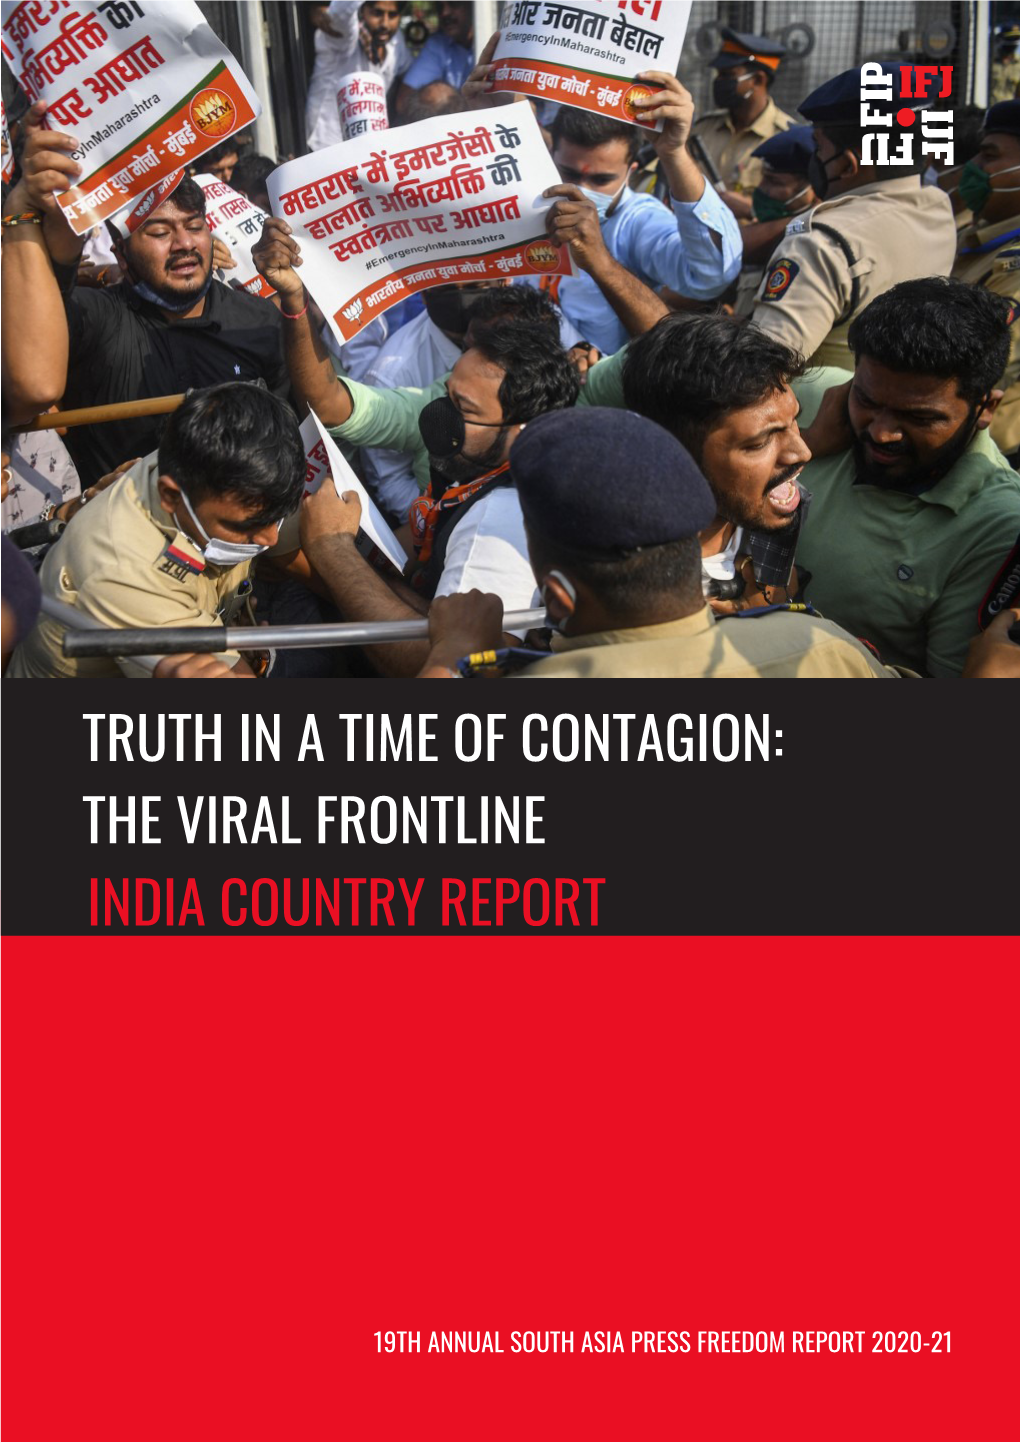 The Viral Frontline India Country Report